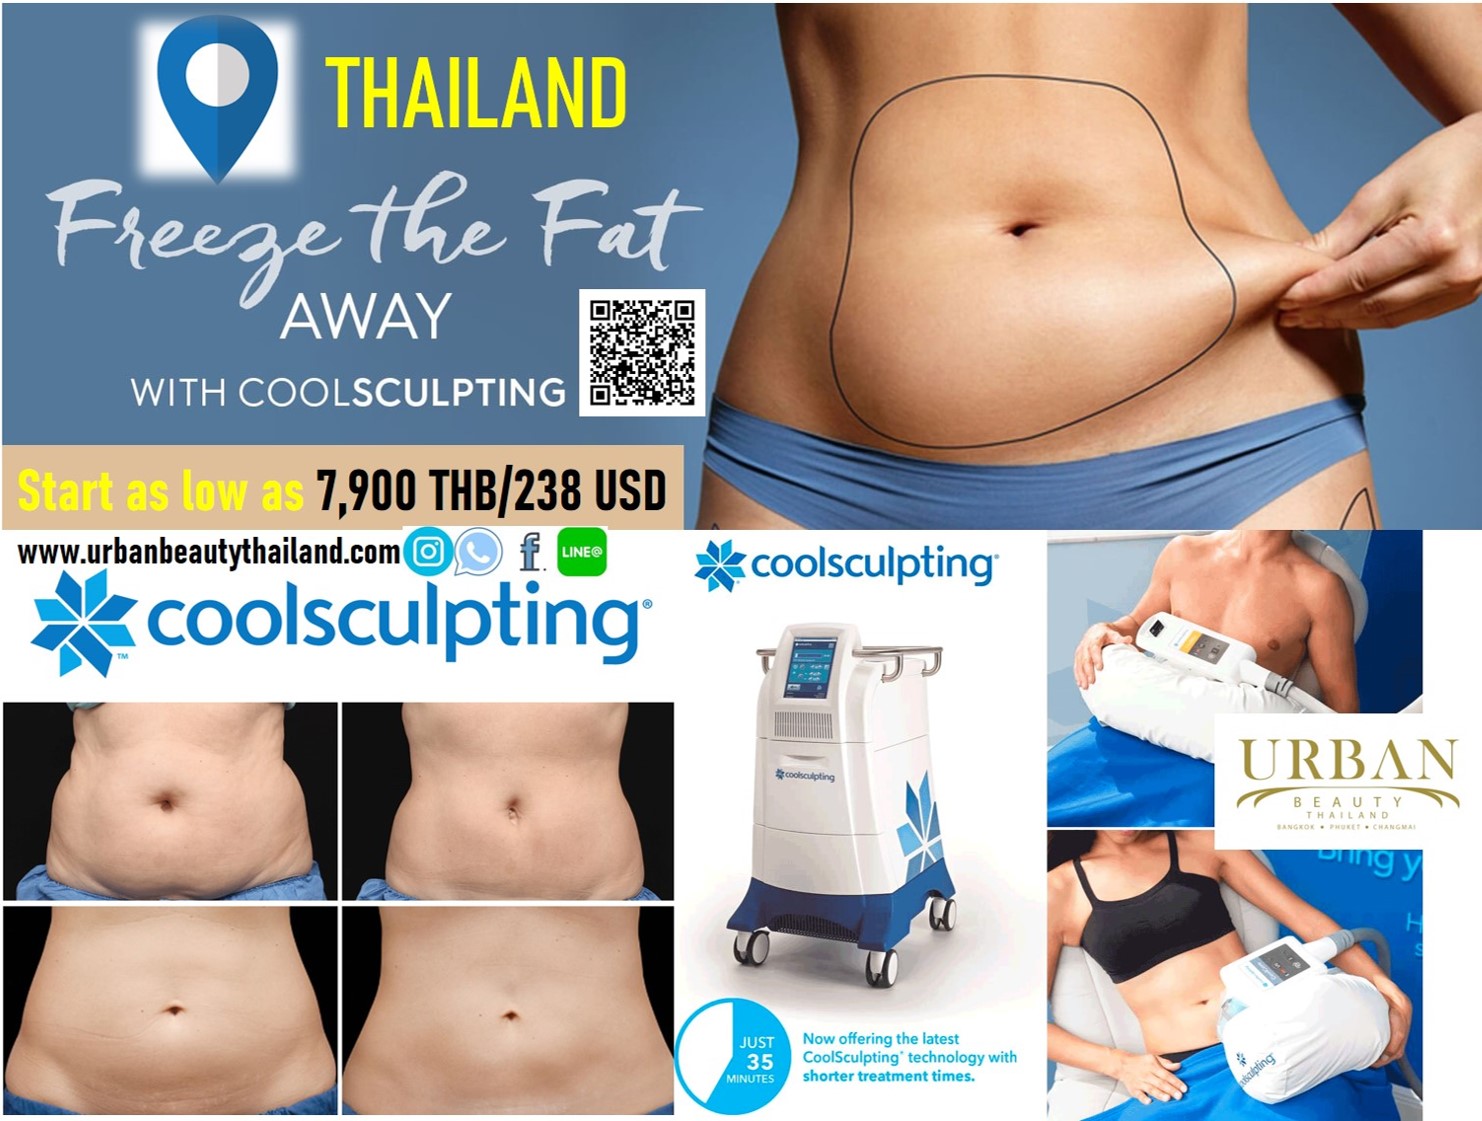 Experience Non-Surgical Fat Loss With Body Sculpting